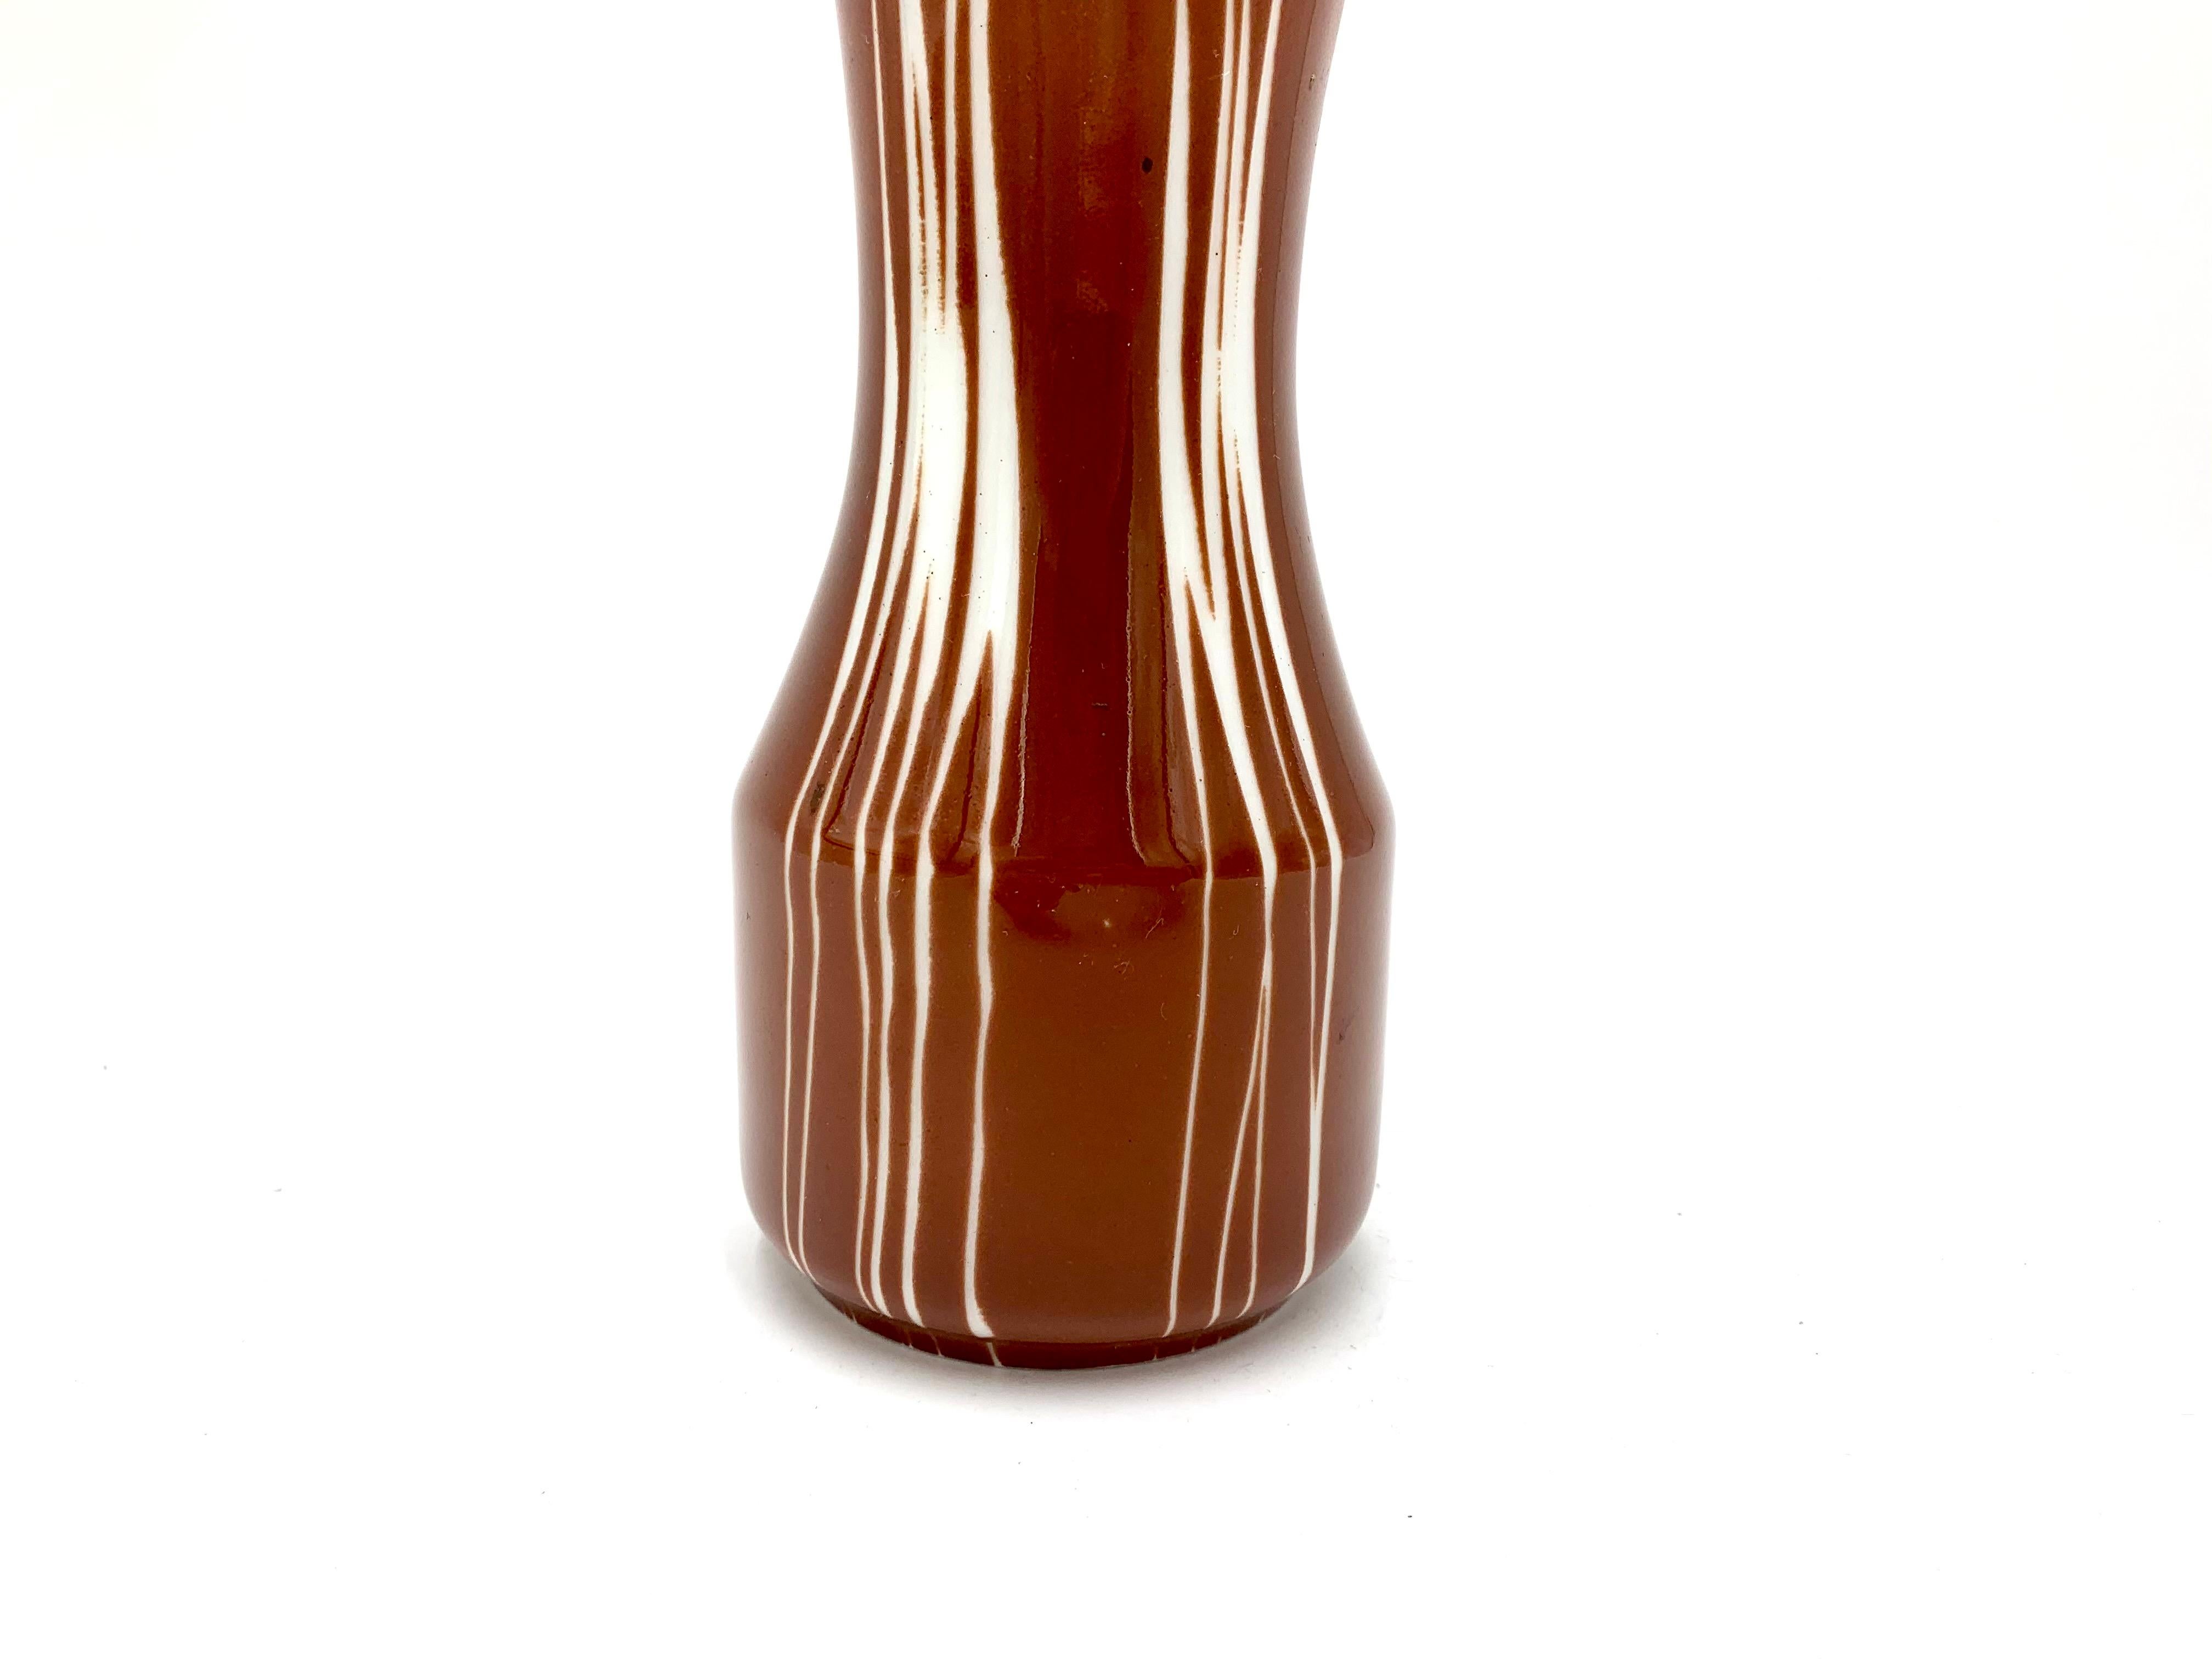 Polish Brown Midcentury Vase, Wawel, Poland New Look, 1960s For Sale